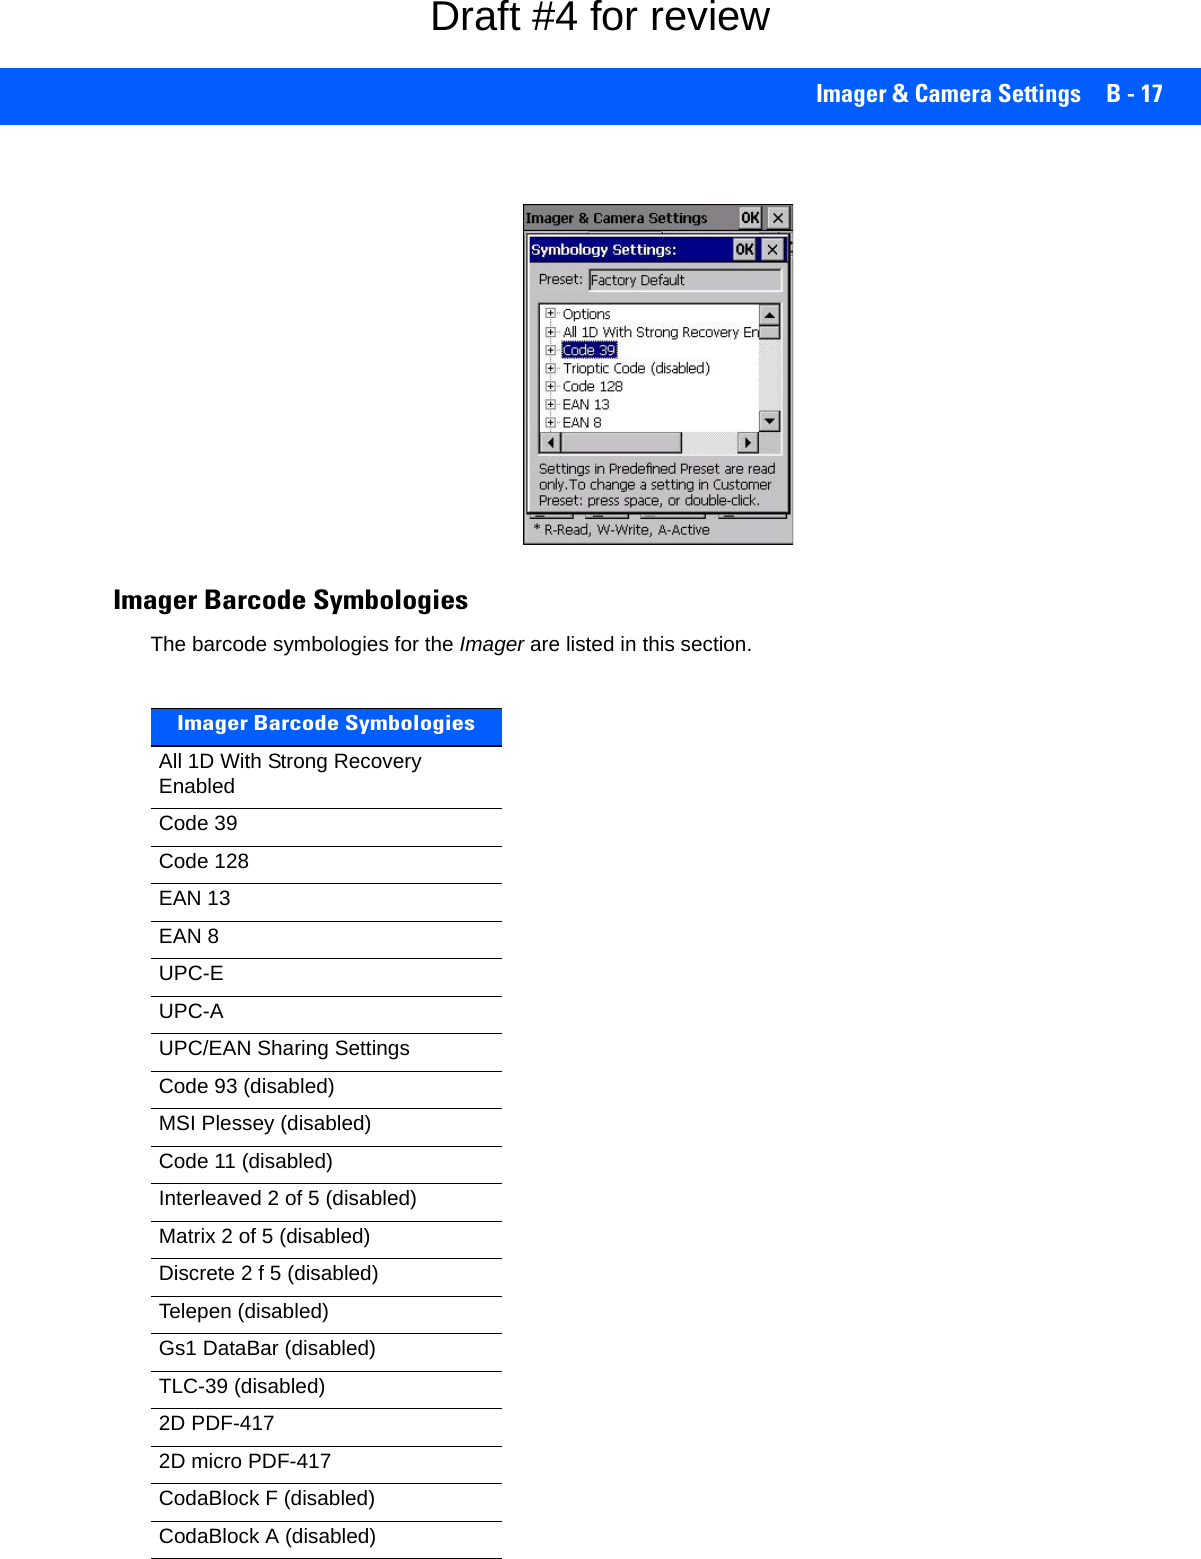 Imager &amp; Camera Settings B - 17Imager Barcode SymbologiesThe barcode symbologies for the Imager are listed in this section.Imager Barcode SymbologiesAll 1D With Strong Recovery EnabledCode 39Code 128EAN 13EAN 8UPC-EUPC-AUPC/EAN Sharing SettingsCode 93 (disabled)MSI Plessey (disabled)Code 11 (disabled)Interleaved 2 of 5 (disabled)Matrix 2 of 5 (disabled)Discrete 2 f 5 (disabled)Telepen (disabled)Gs1 DataBar (disabled)TLC-39 (disabled)2D PDF-4172D micro PDF-417CodaBlock F (disabled)CodaBlock A (disabled)Draft #4 for review